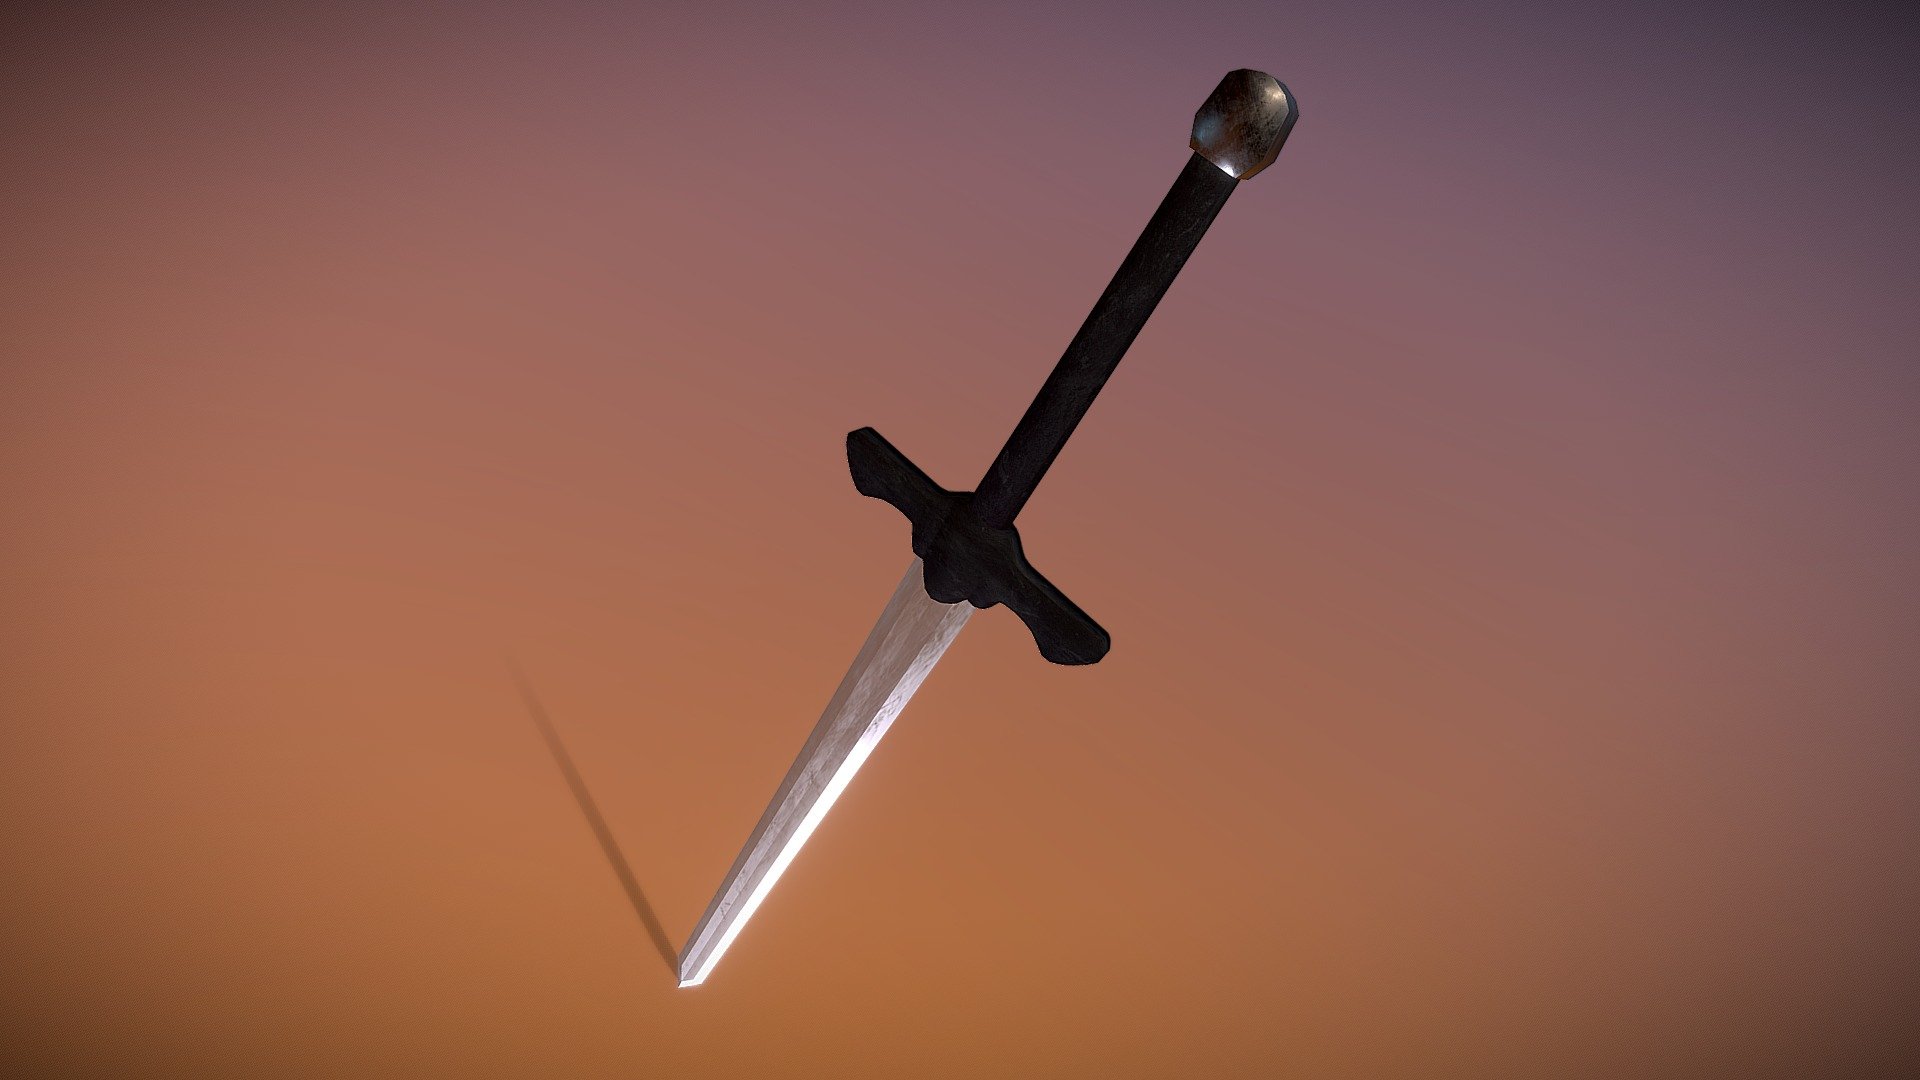 The Dark Souls 3 weapon: Sunlight Straight Sword
This model has been made by looking at the original model and taking it as an inspiration, even though i tried to make it close to the original, this is but a inspired model 3d model